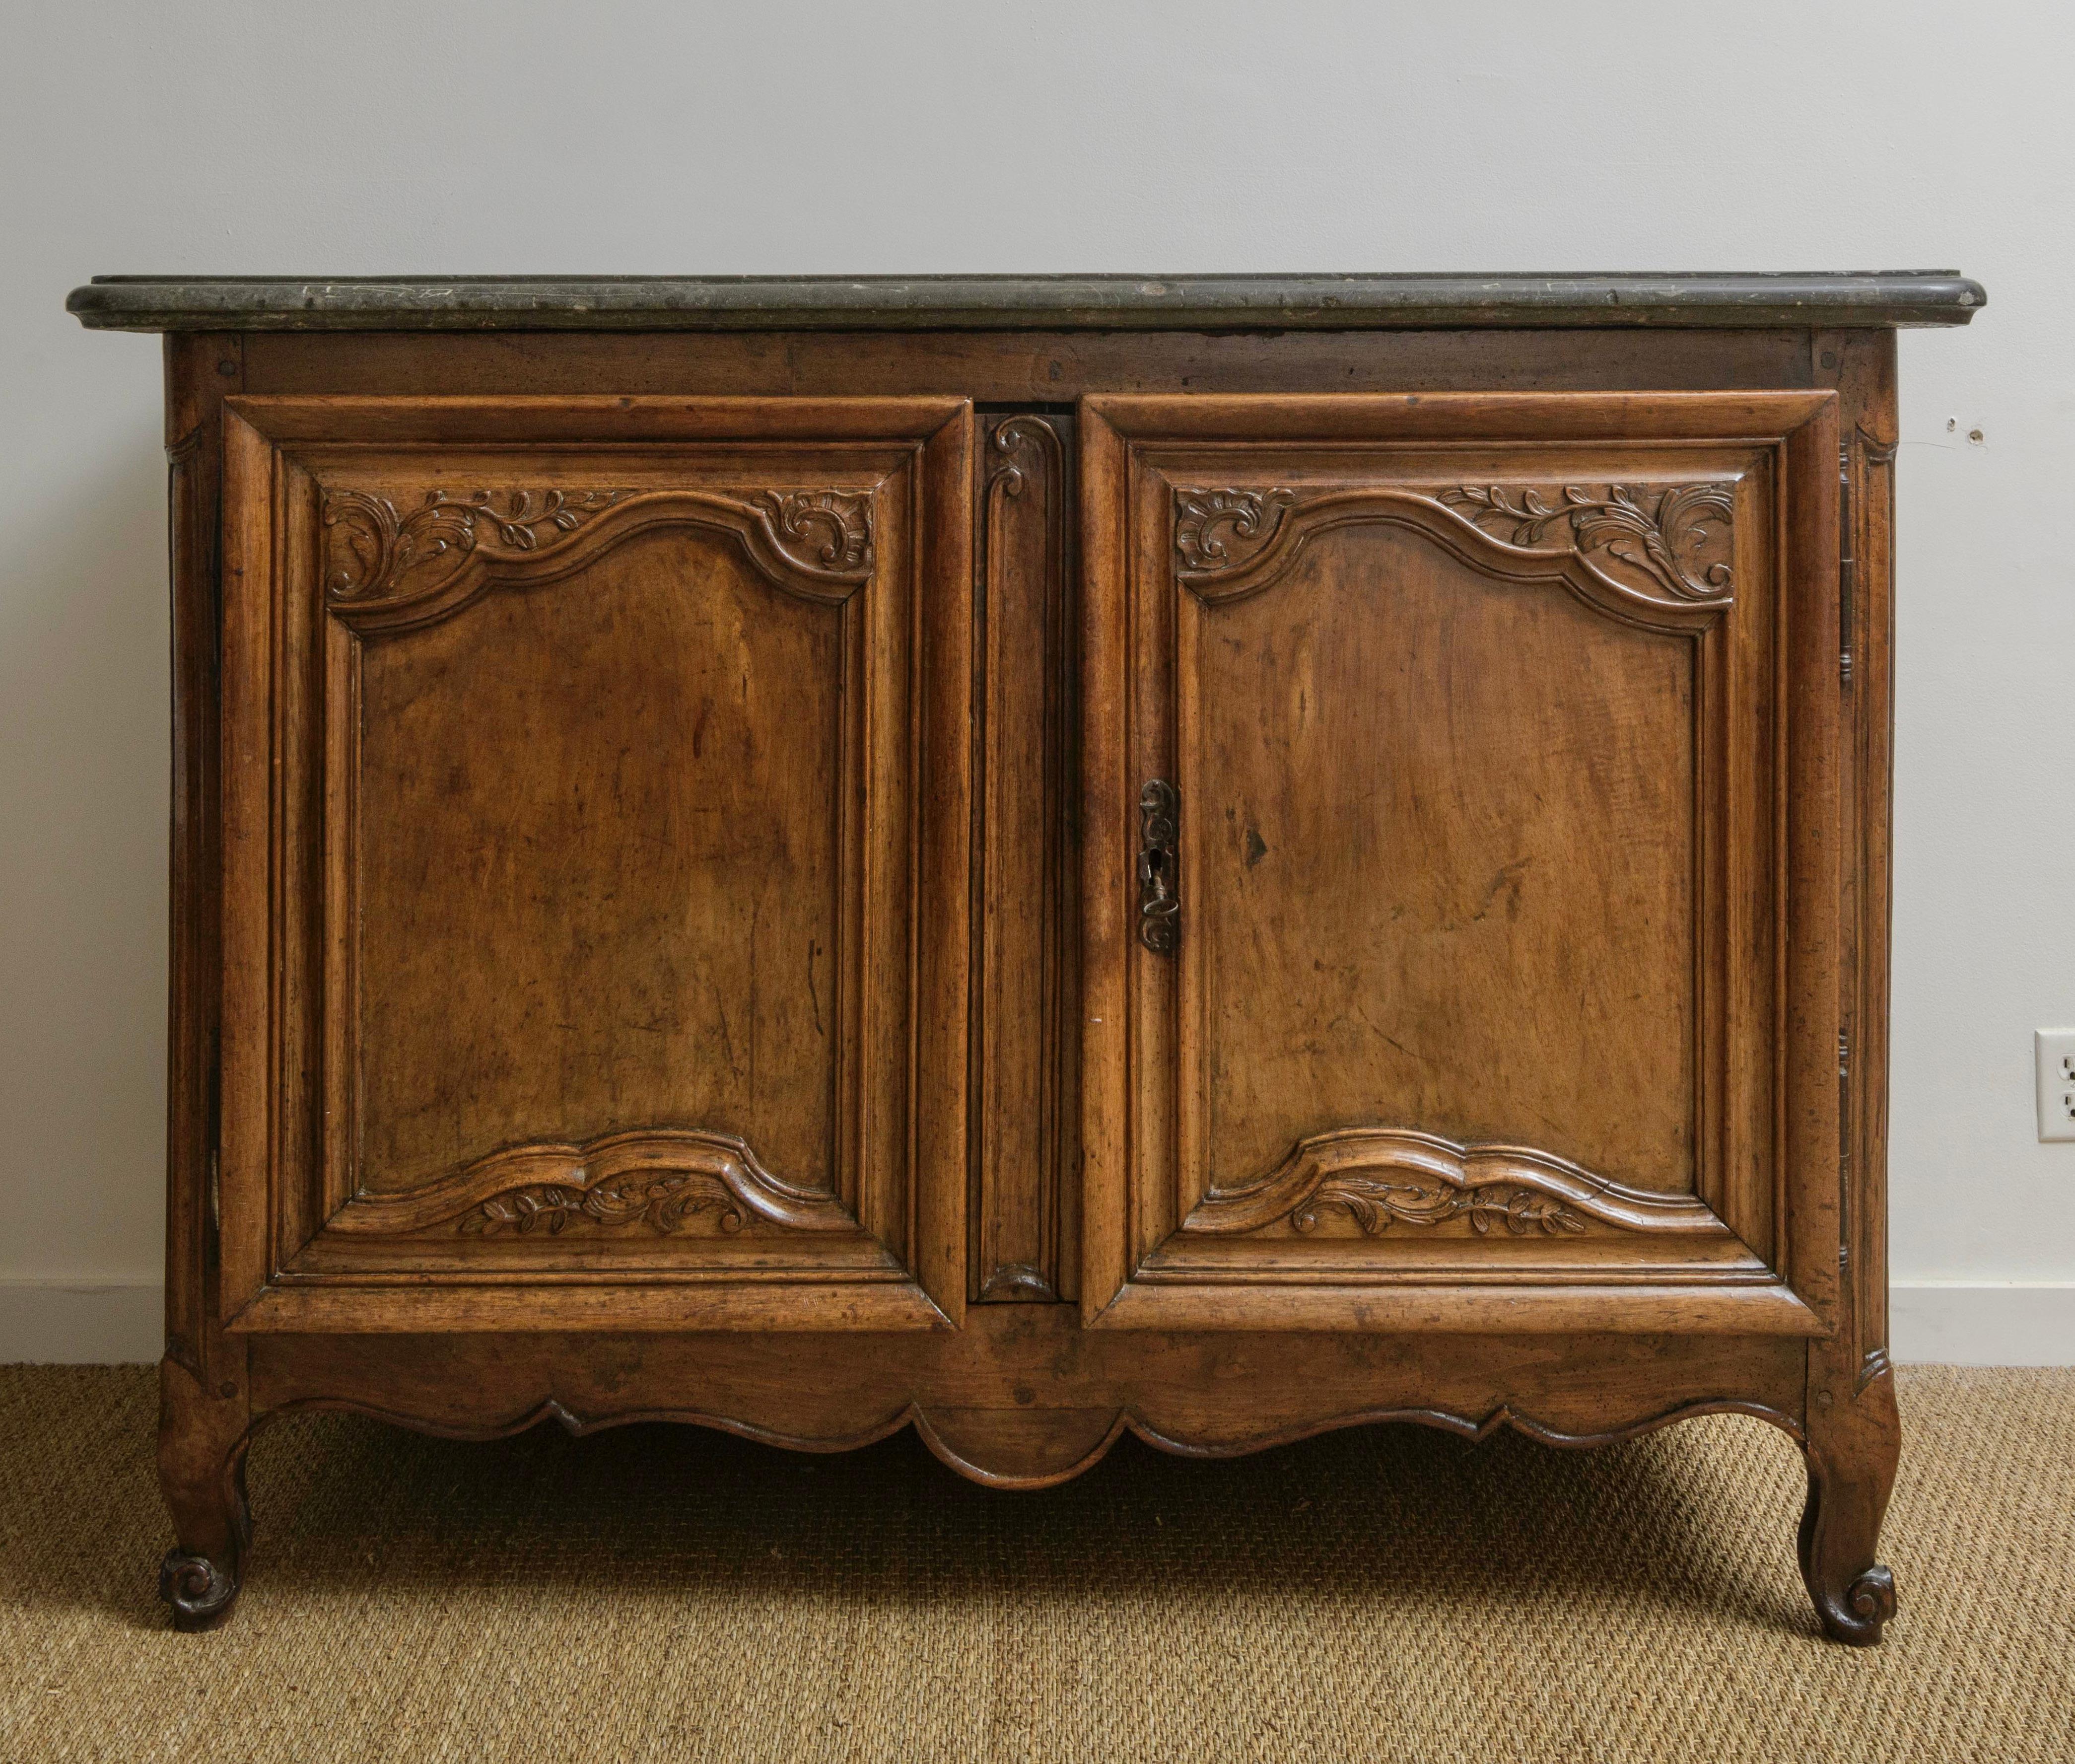 From the Louis XV period this exquisite walnut buffet de chasse, ypical of  Lyon region furniture , exudes timeless elegance. Crafted circa 1750 in Lyon, it bears the hallmark of meticulous hand-carving. Crowned with the original  1 7/8 thick dark